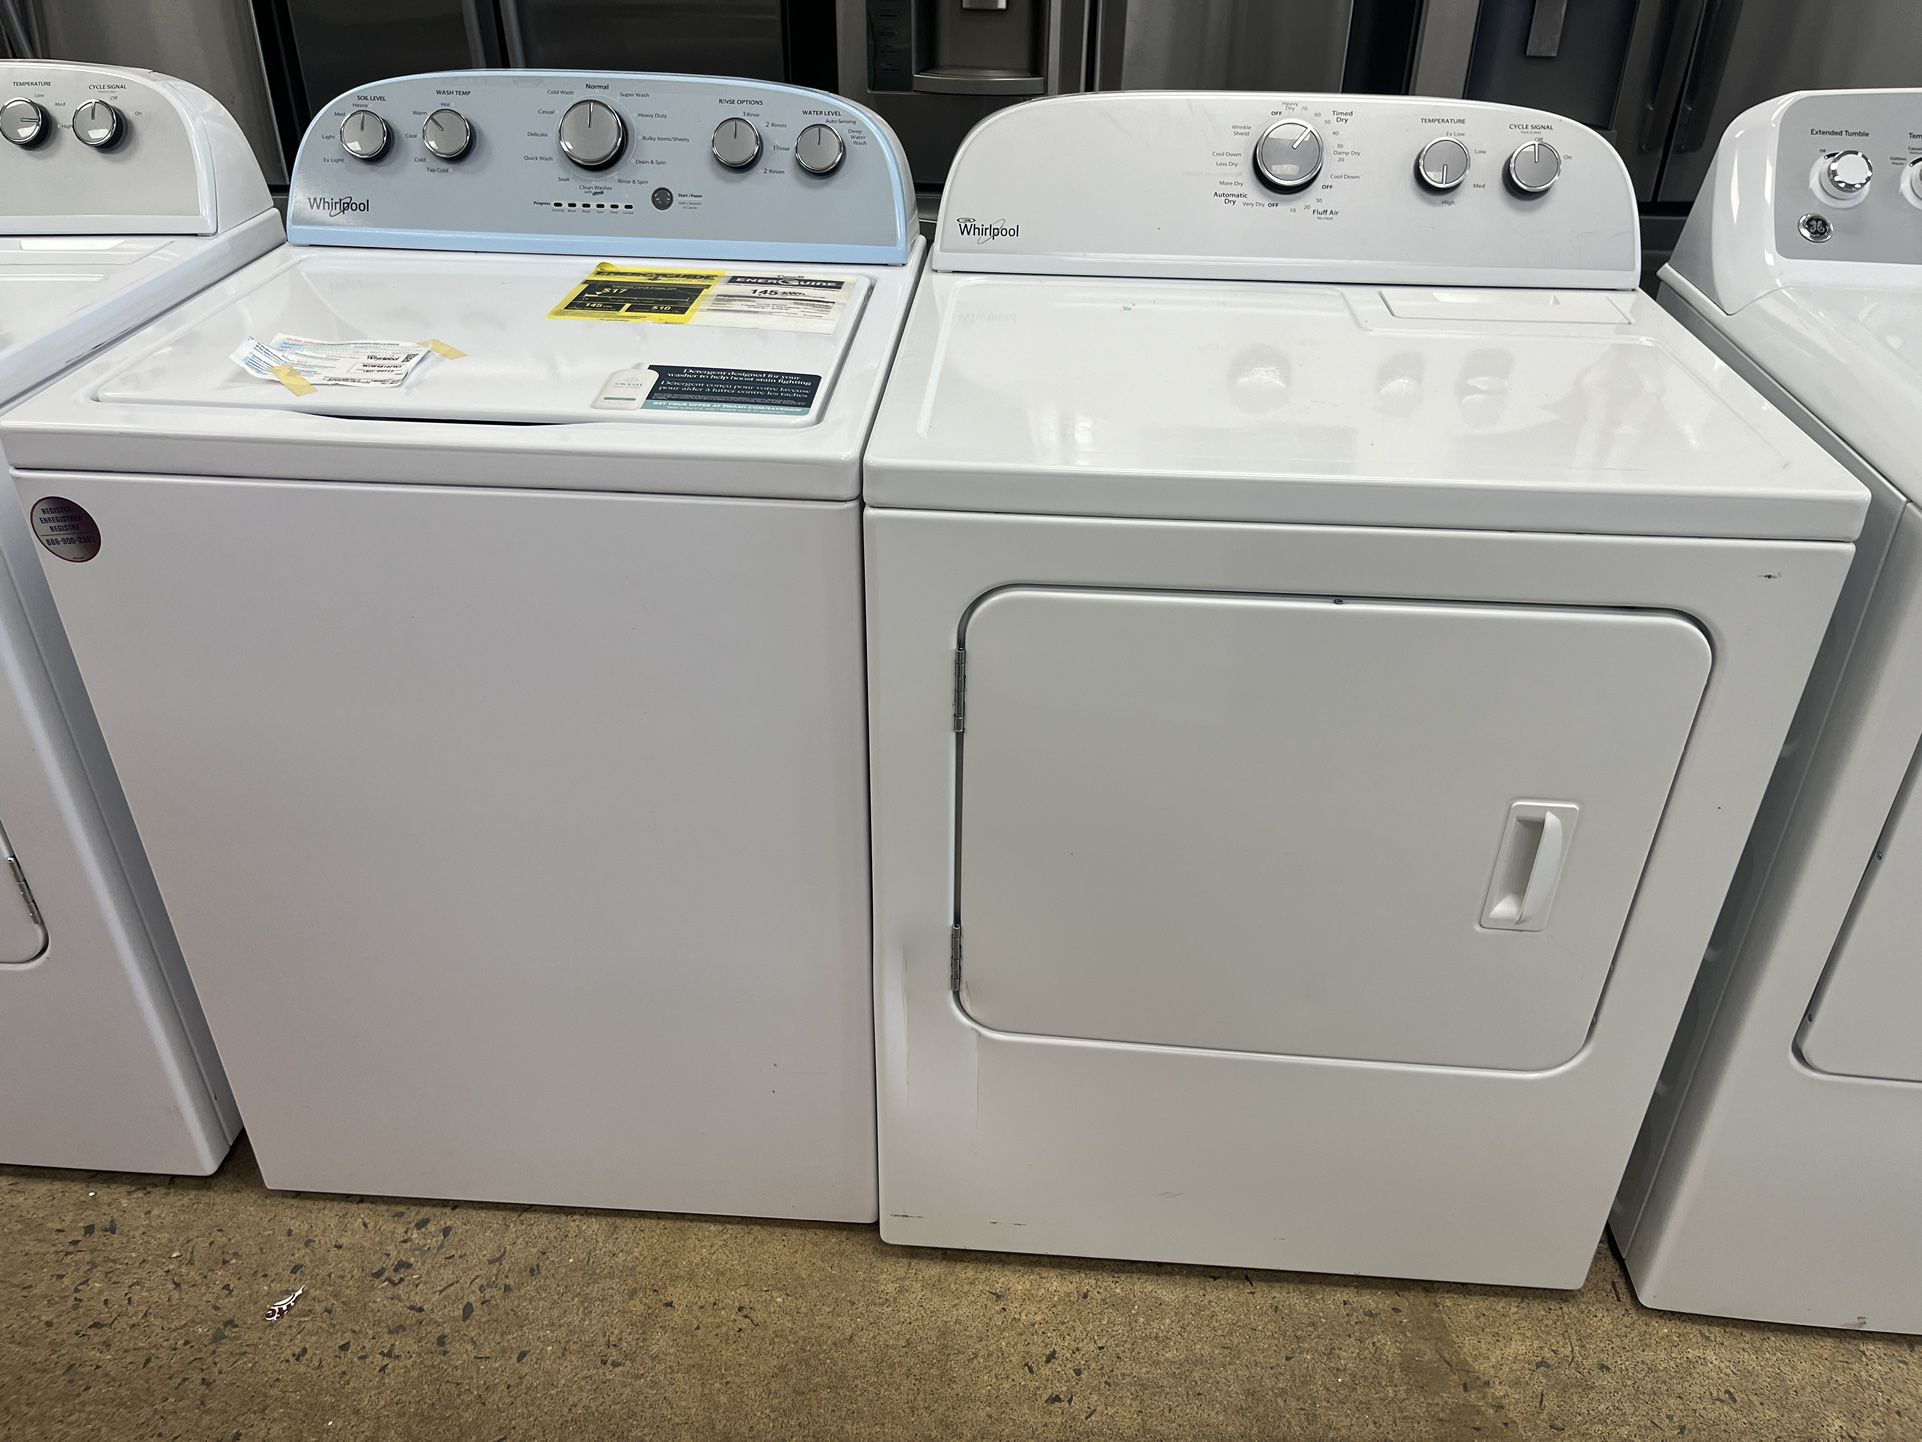 Washer And Electric Dryer Whirlpool Top Loader